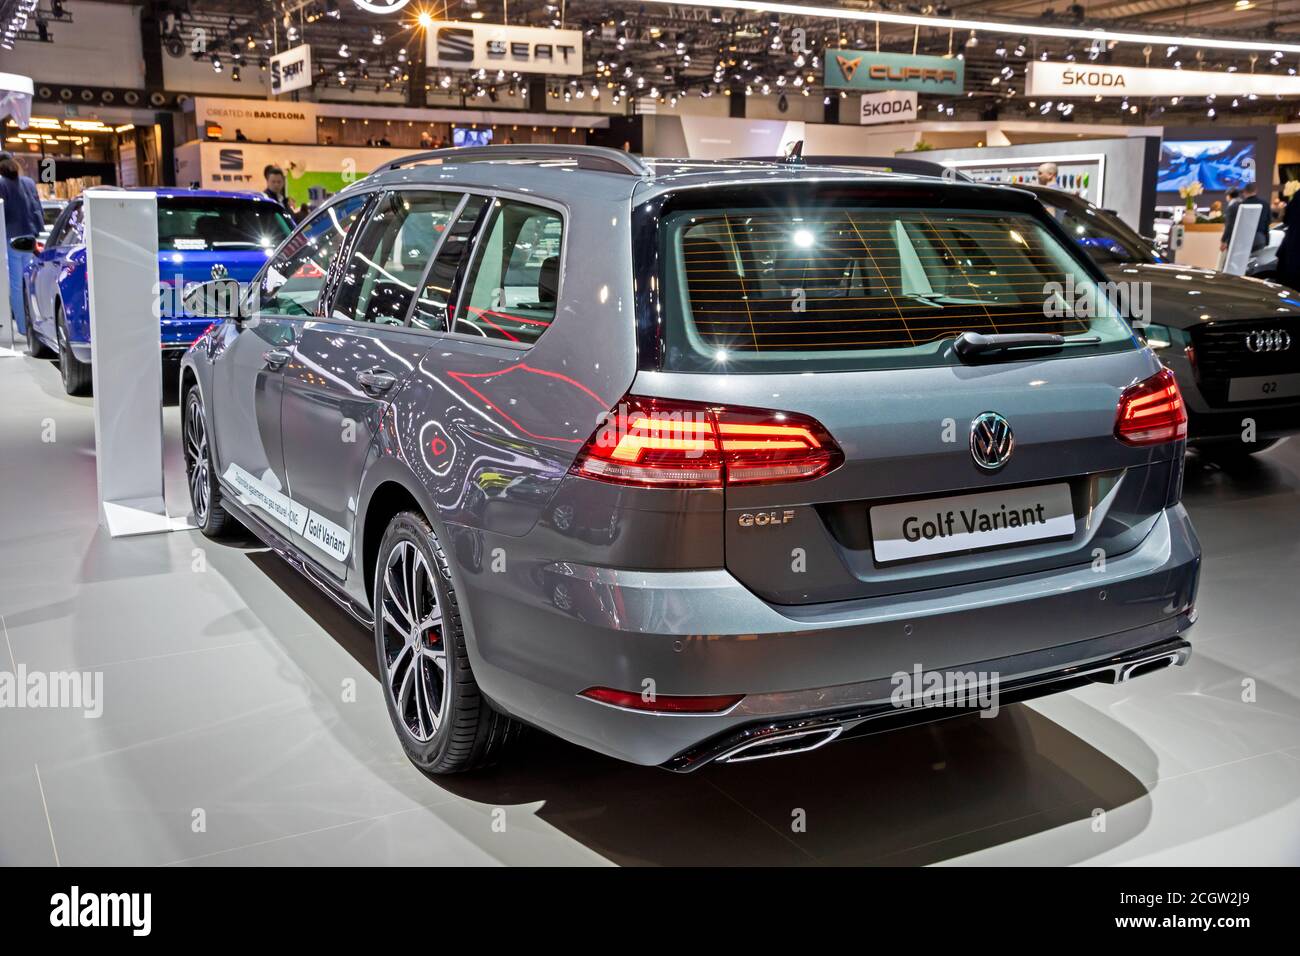 BRUSSELS - JAN 9, 2020: New Volkswagen Golf Variant car model showcased at  the Brussels Autosalon 2020 Motor Show Stock Photo - Alamy